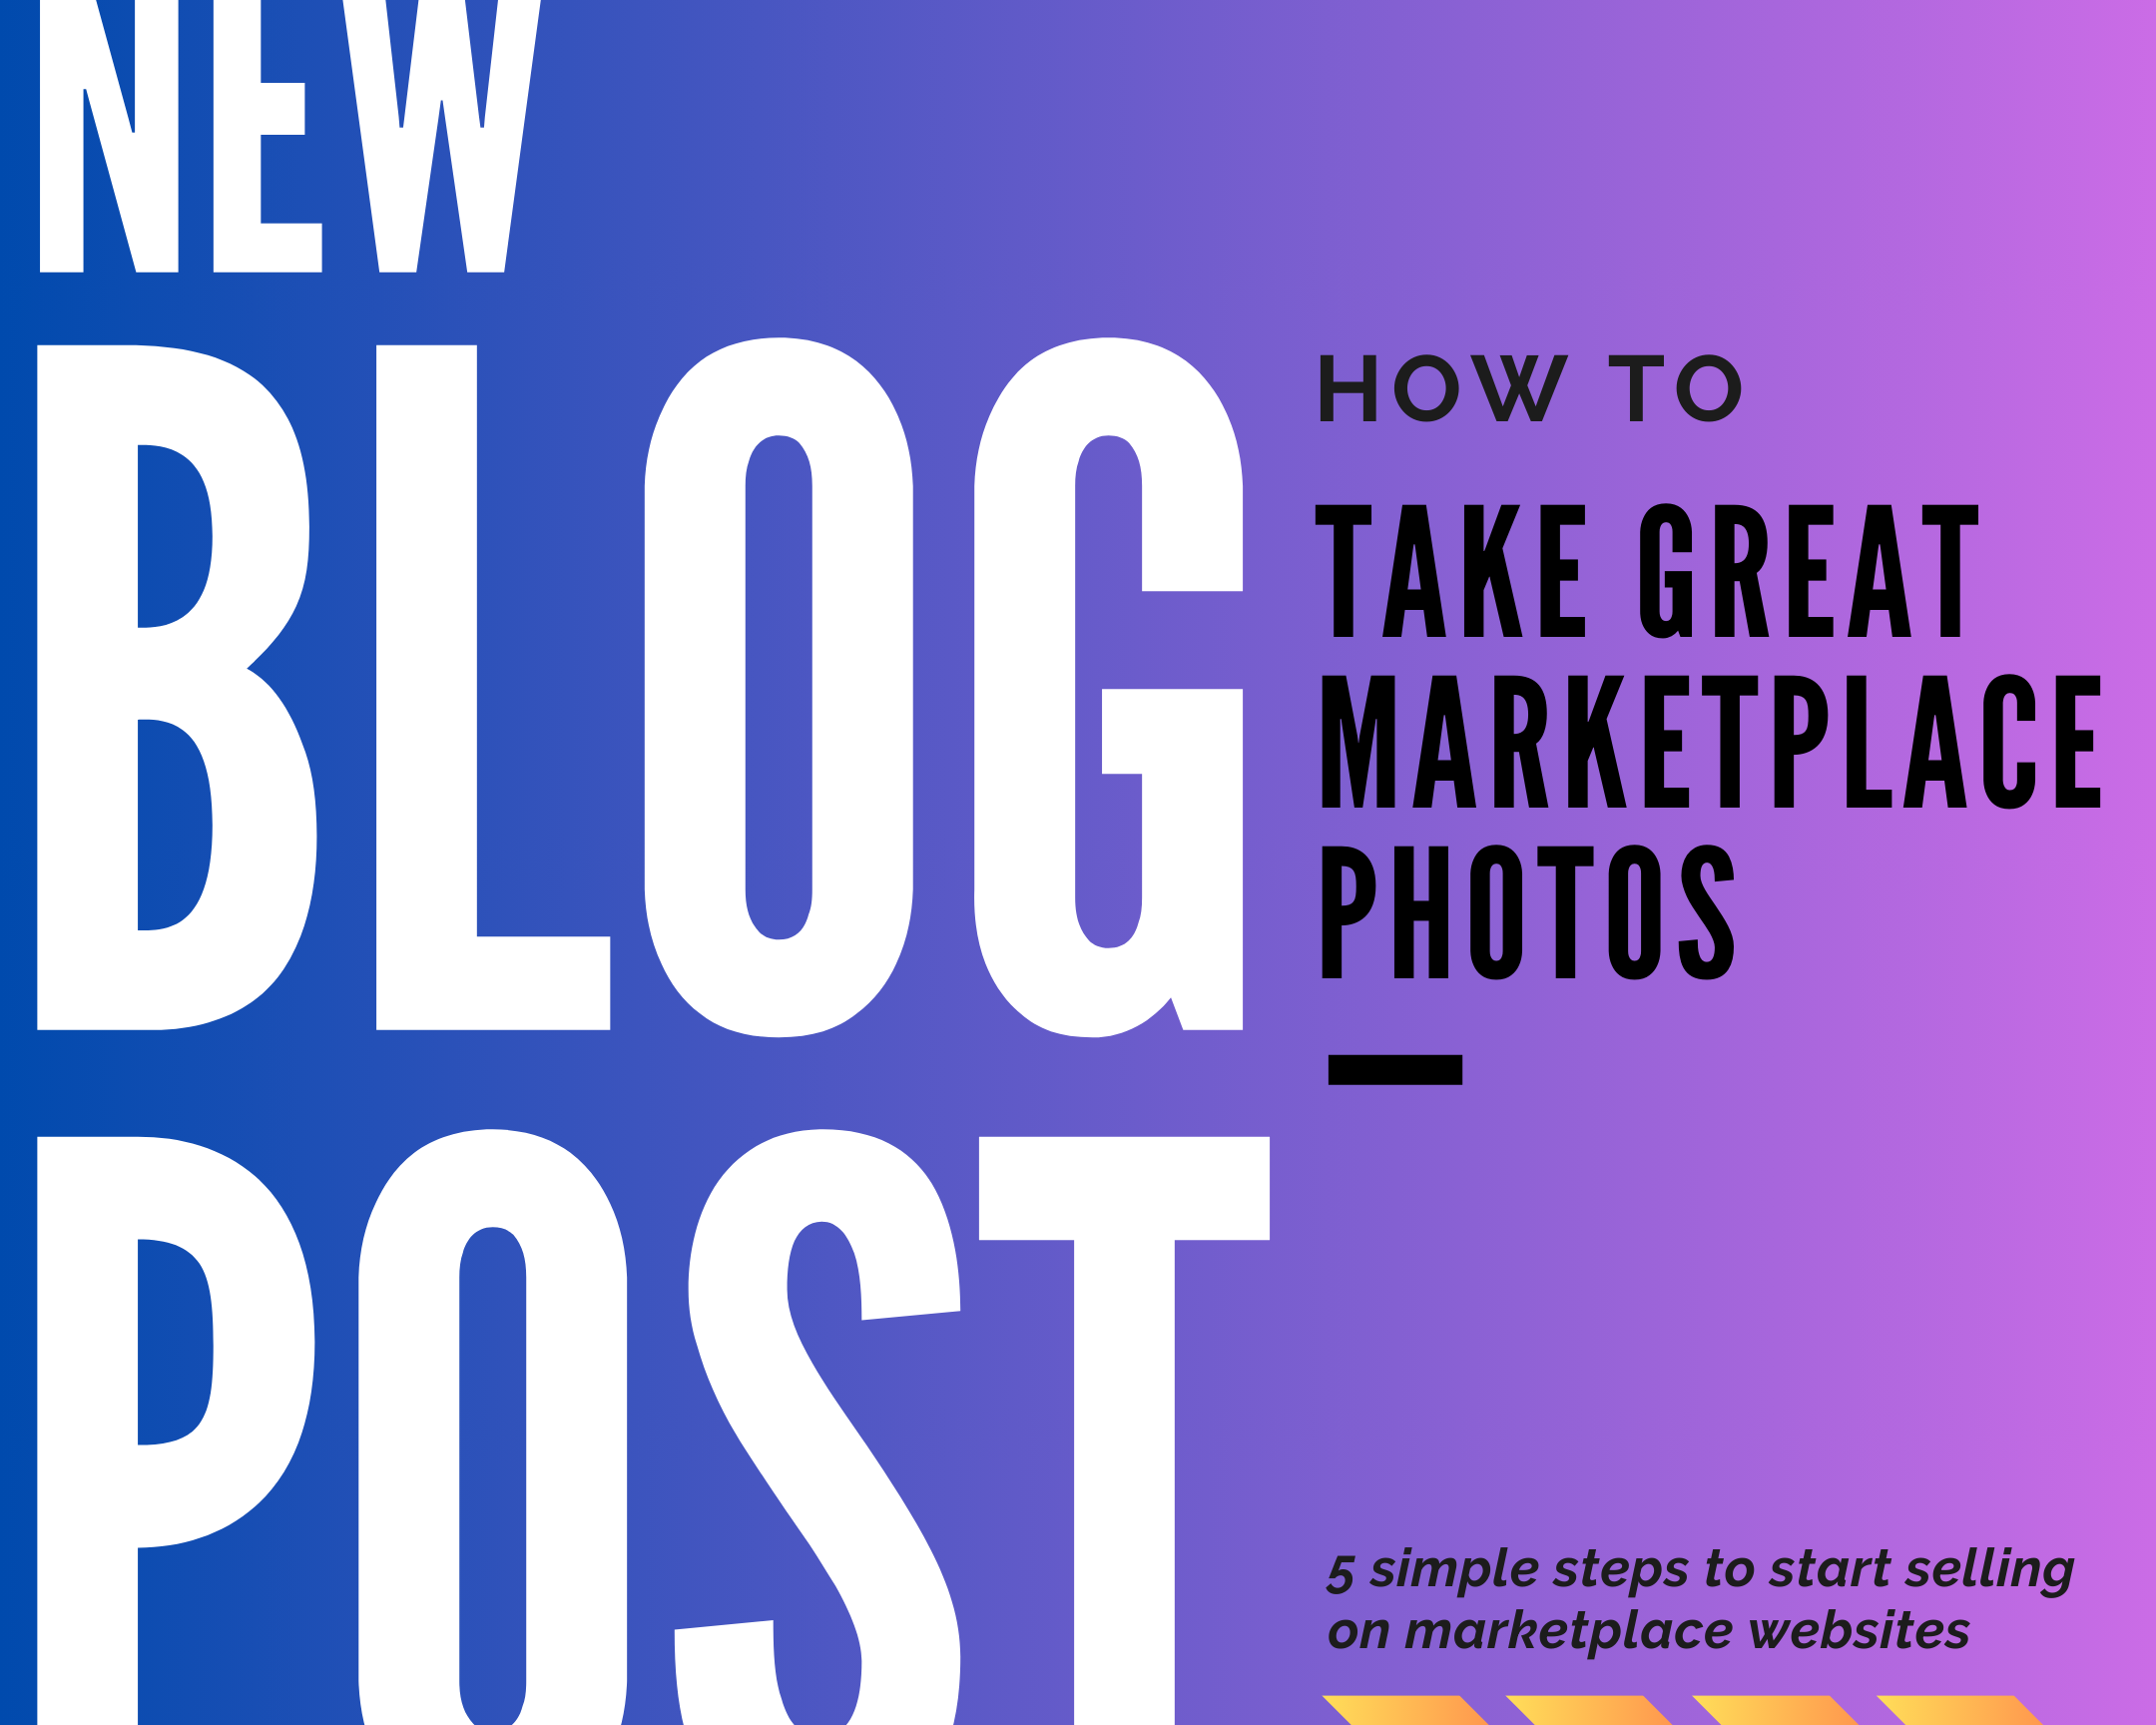 Take GREAT Marketplace Product photos in 5 easy steps